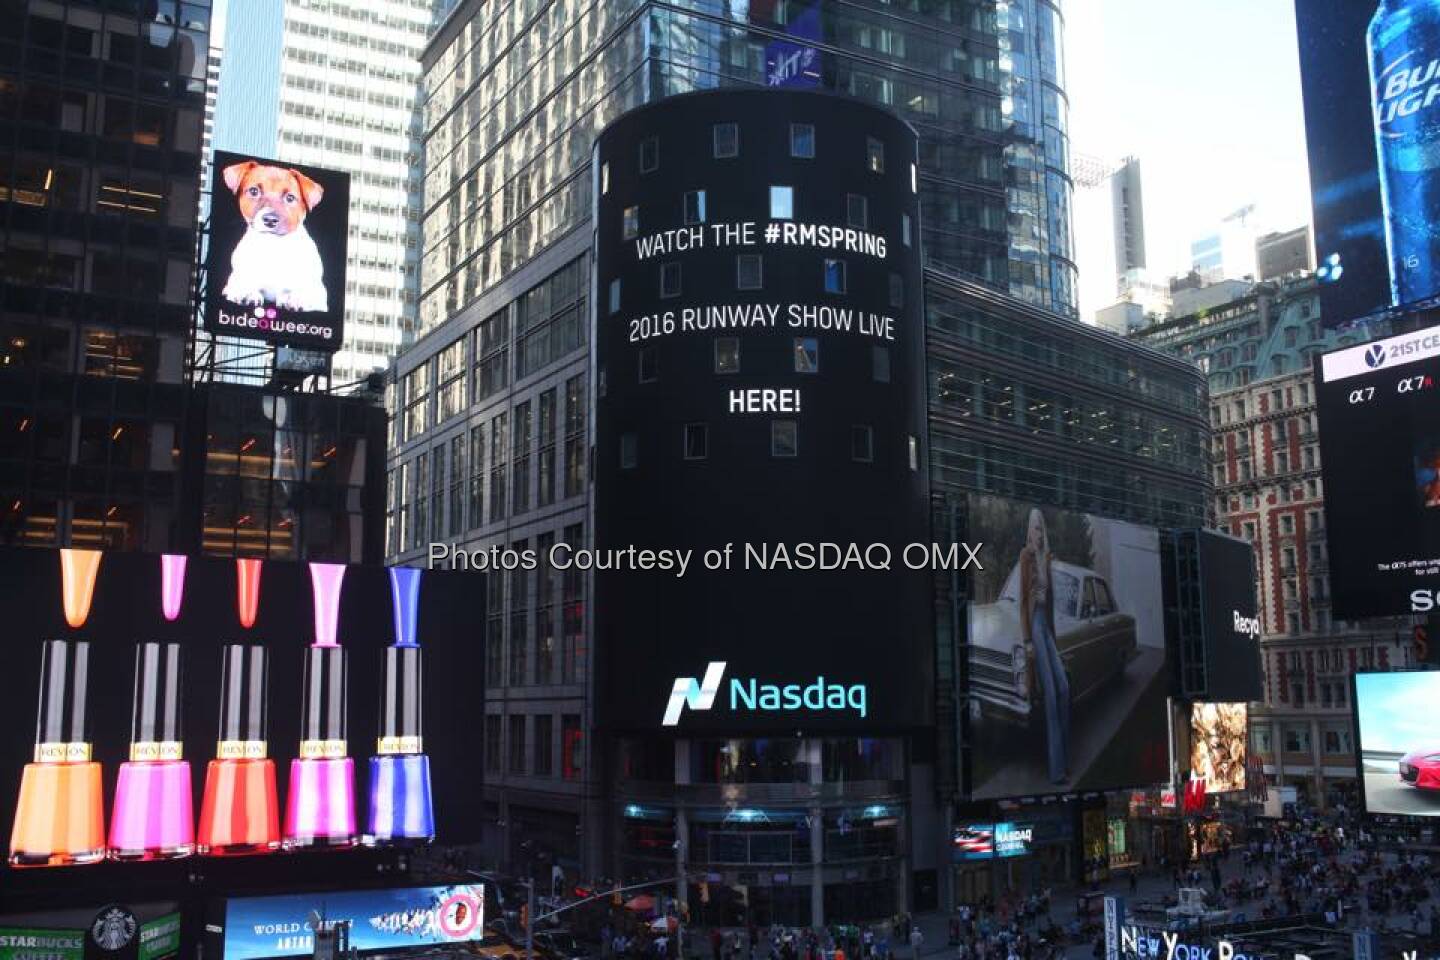 Tune-in Tomorrow at 12:00pm to watch the Rebecca Minkoff #RMSpring 2016 Runway Show LIVE here and on the Nasdaq Tower: http://www.rebeccaminkoff.com/spring-2016-runway-show #NYFW  Source: http://facebook.com/NASDAQ